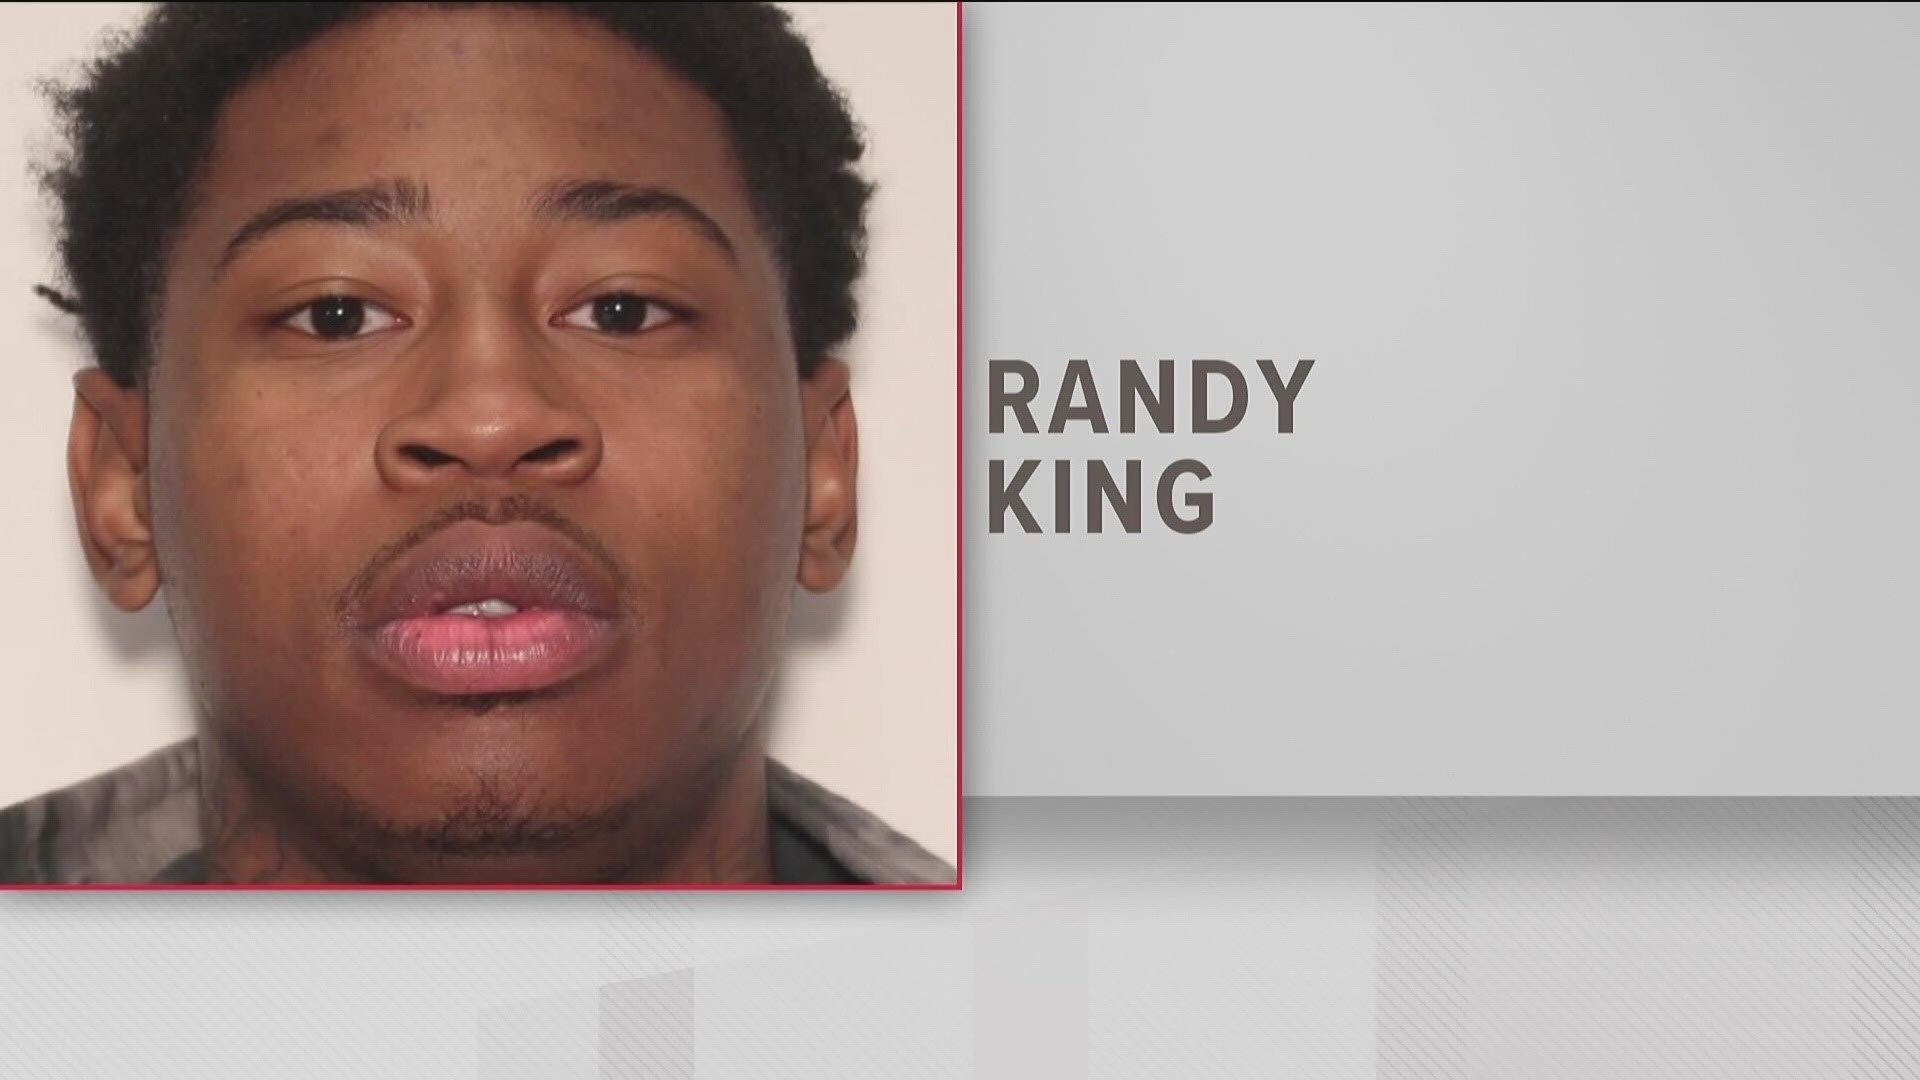 Atlanta police say 22-year-old Randy King is wanted in connection to the deadly Sept. 3 shooting.